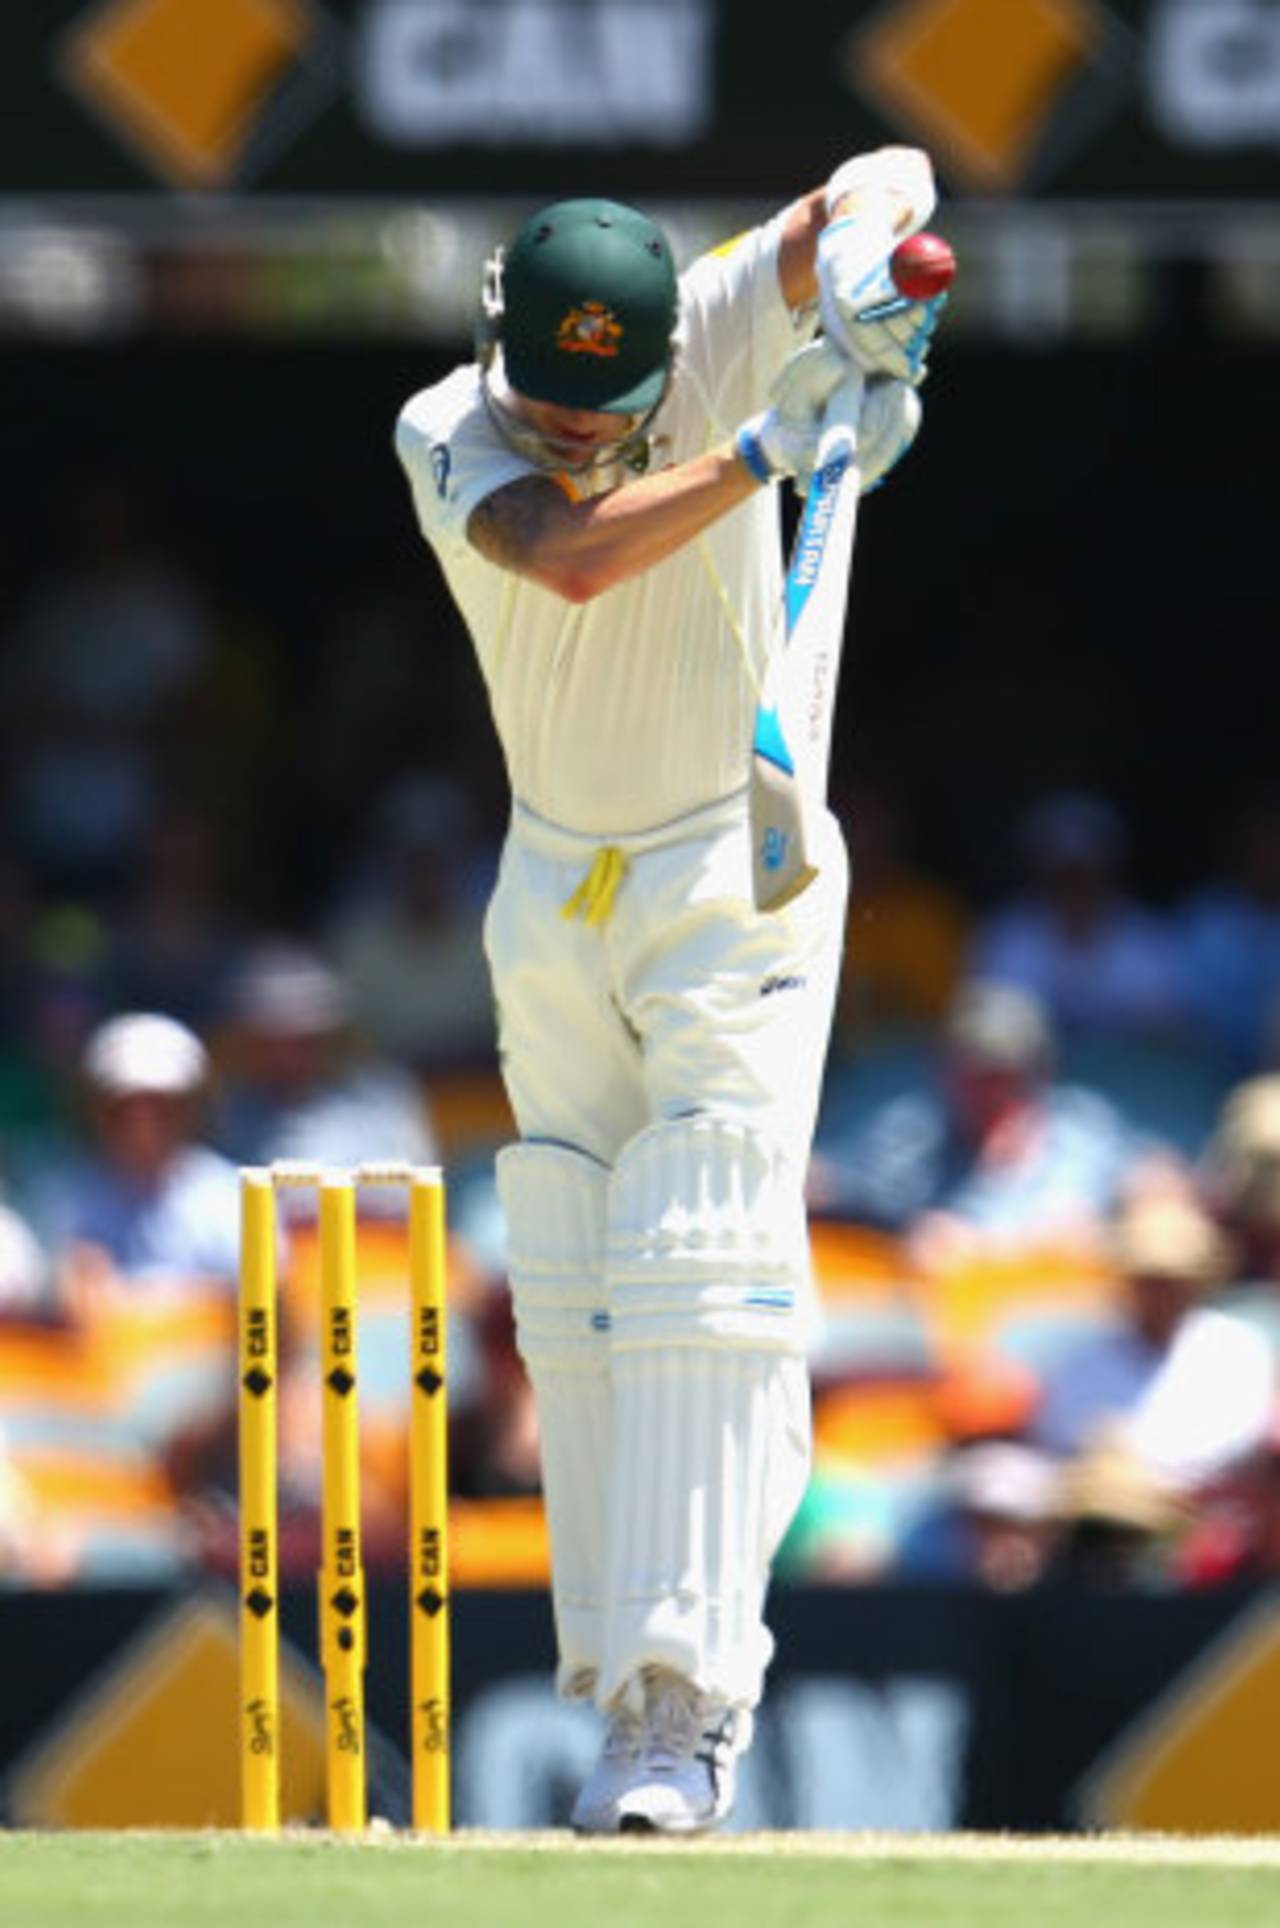 Michael Clarke was unable to deal with a short ball, Australia v England, 1st Test, Brisbane, 1st day, November 21, 2013